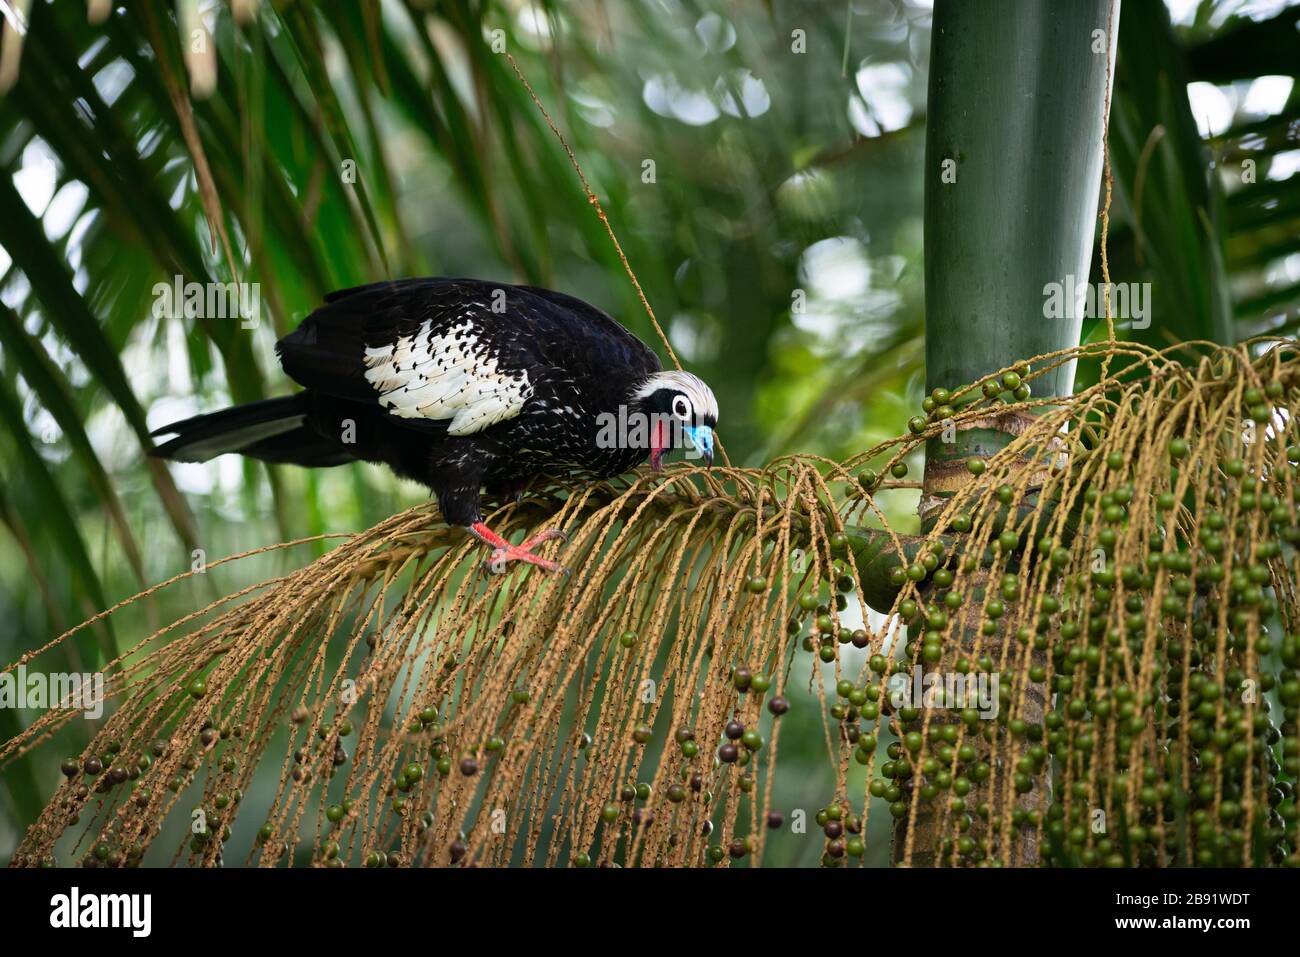 An endangered Black-fronted Piping-Guan (Pipile jacutinga) eating the fruits of Palmito palm (Euterpe edulis) from the Atlantic Rainforest Stock Photo